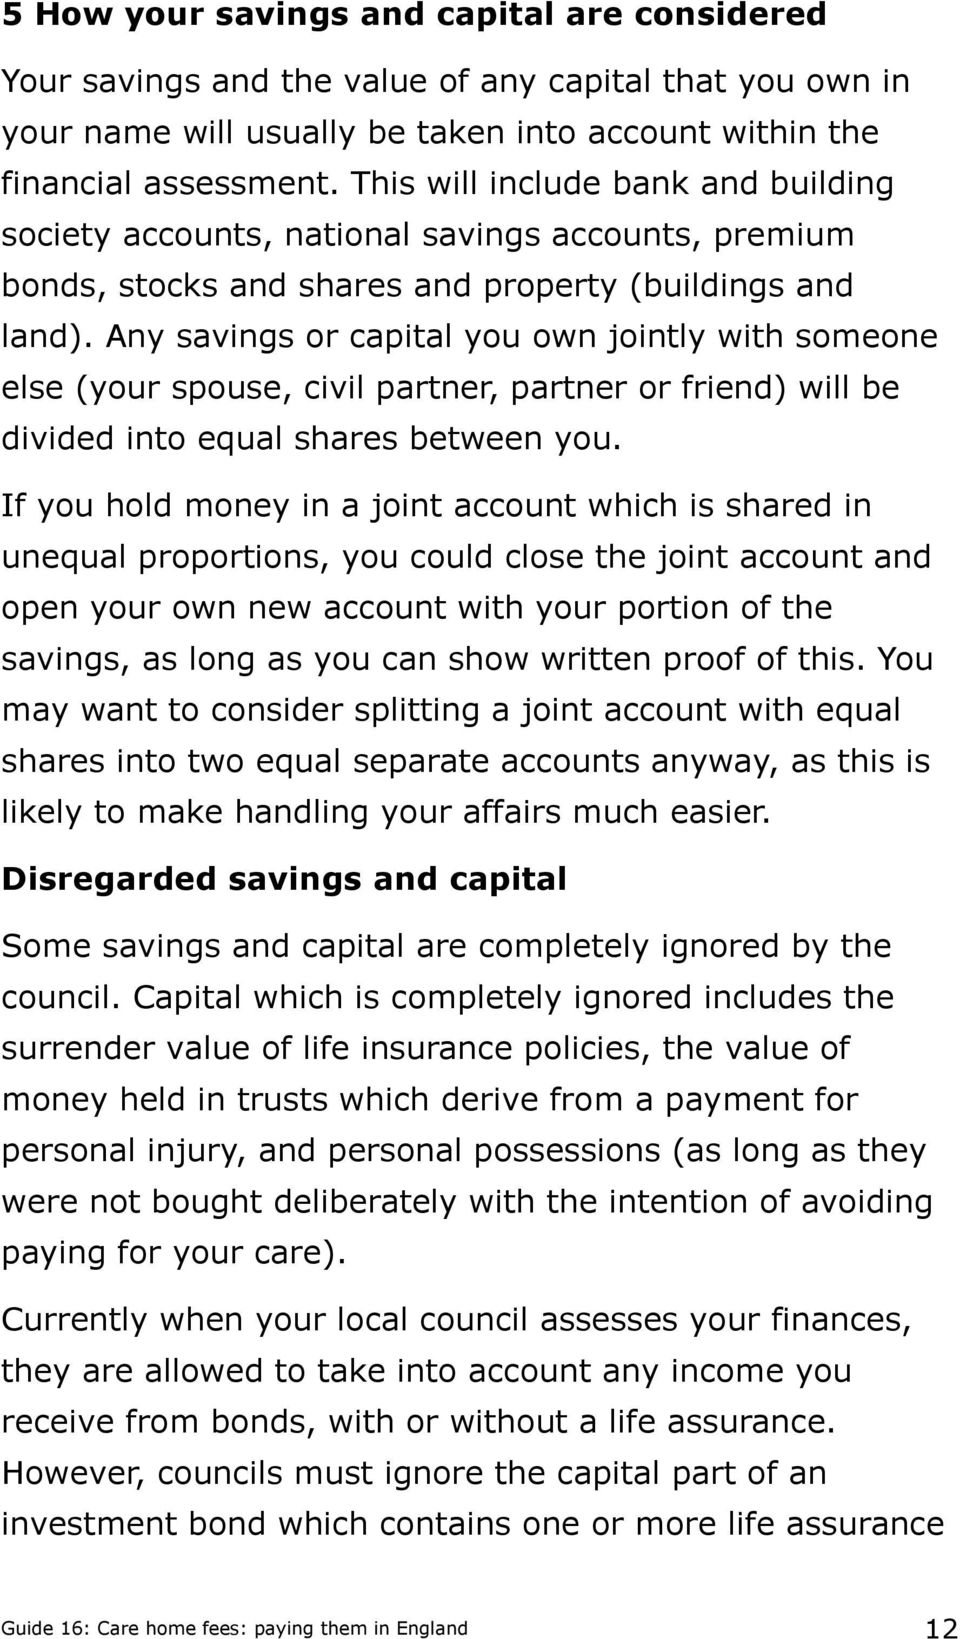 Any savings or capital you own jointly with someone else (your spouse, civil partner, partner or friend) will be divided into equal shares between you.